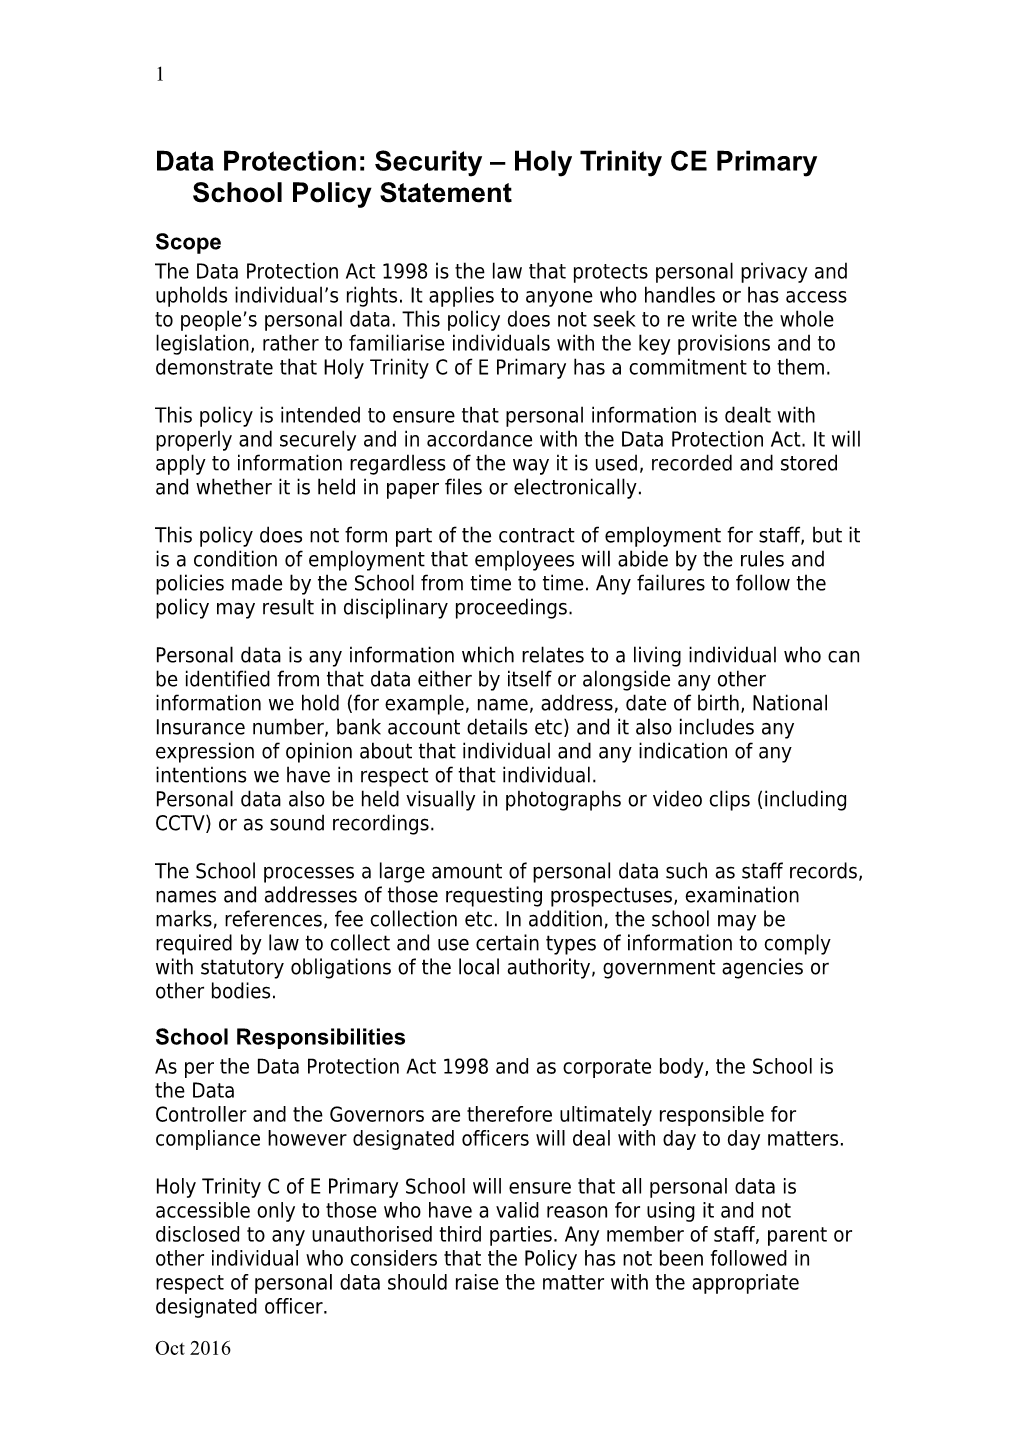 Data Protection: Security Holy Trinity CE Primary School Policy Statement